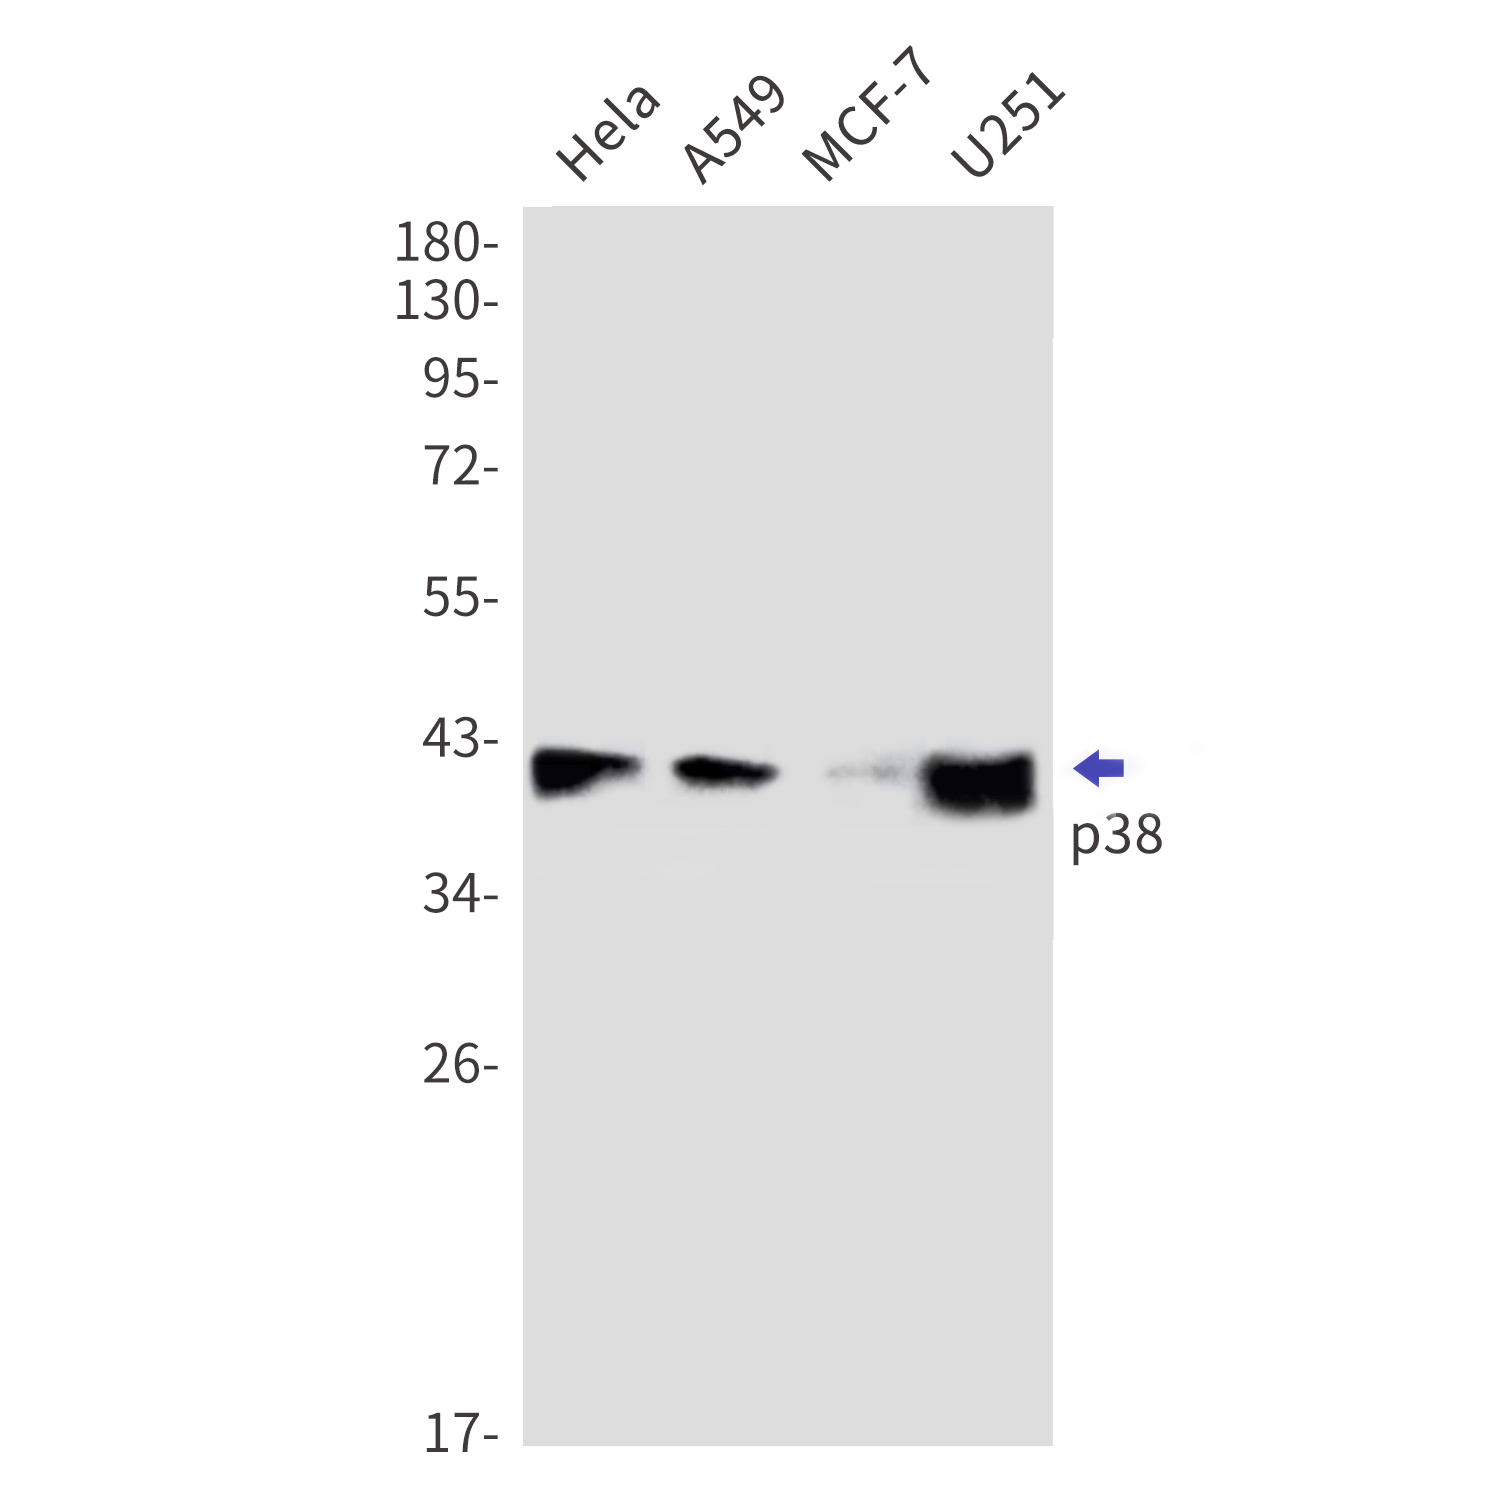 Western blot detection of p38 in Hela,A549,MCF-7,U251 cell lysates using p38 Rabbit mAb(1:1000 diluted).Predicted band size:41kDa.Observed band size:41kDa.